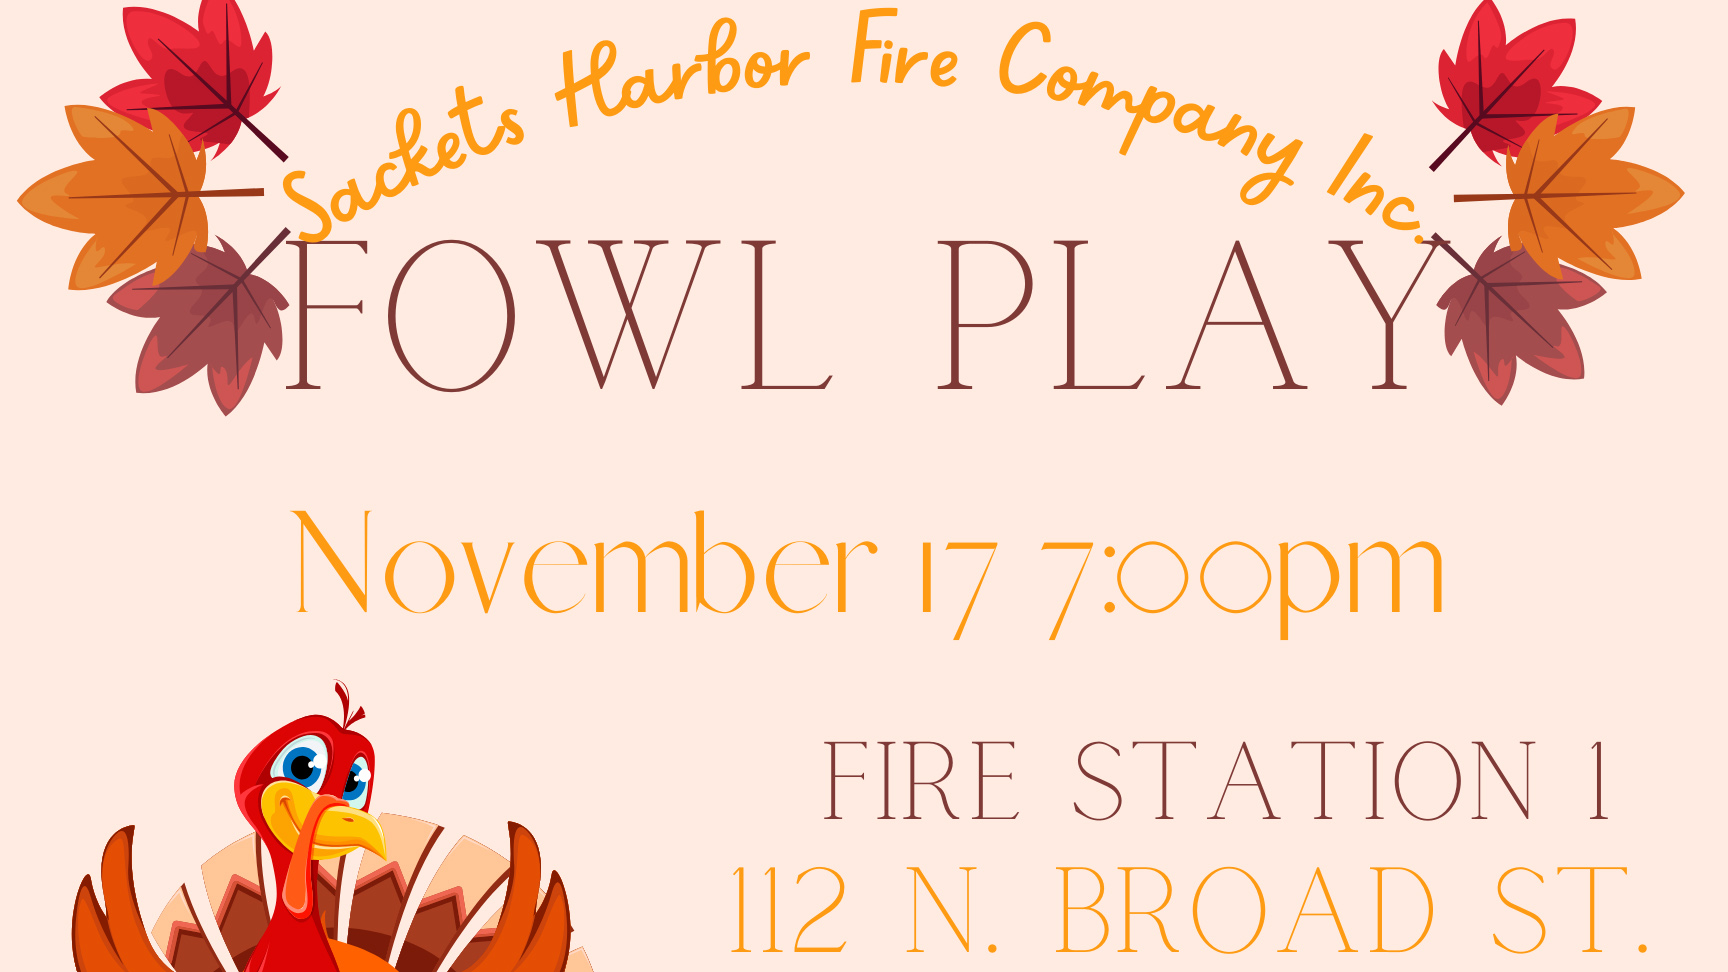 Cropped version of the Sackets Harbor Fire Company's Fowl Play flyer